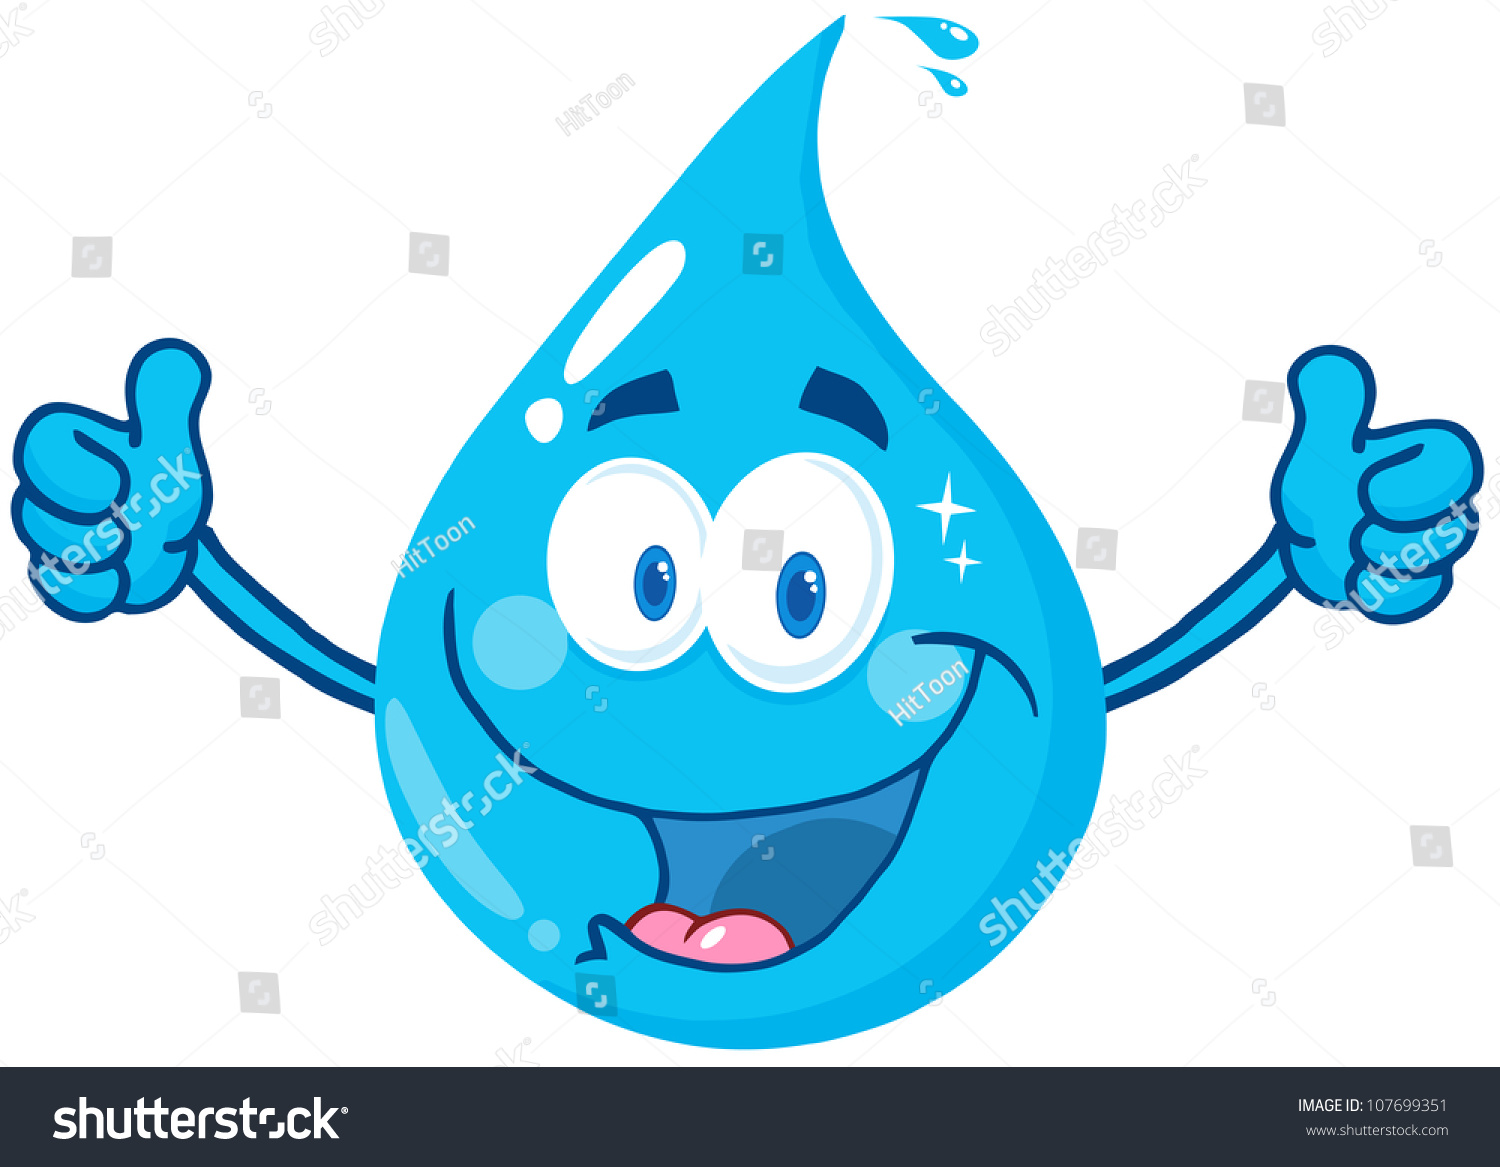 Smiling Water Drop Showing Double Thumbs のイラスト素材